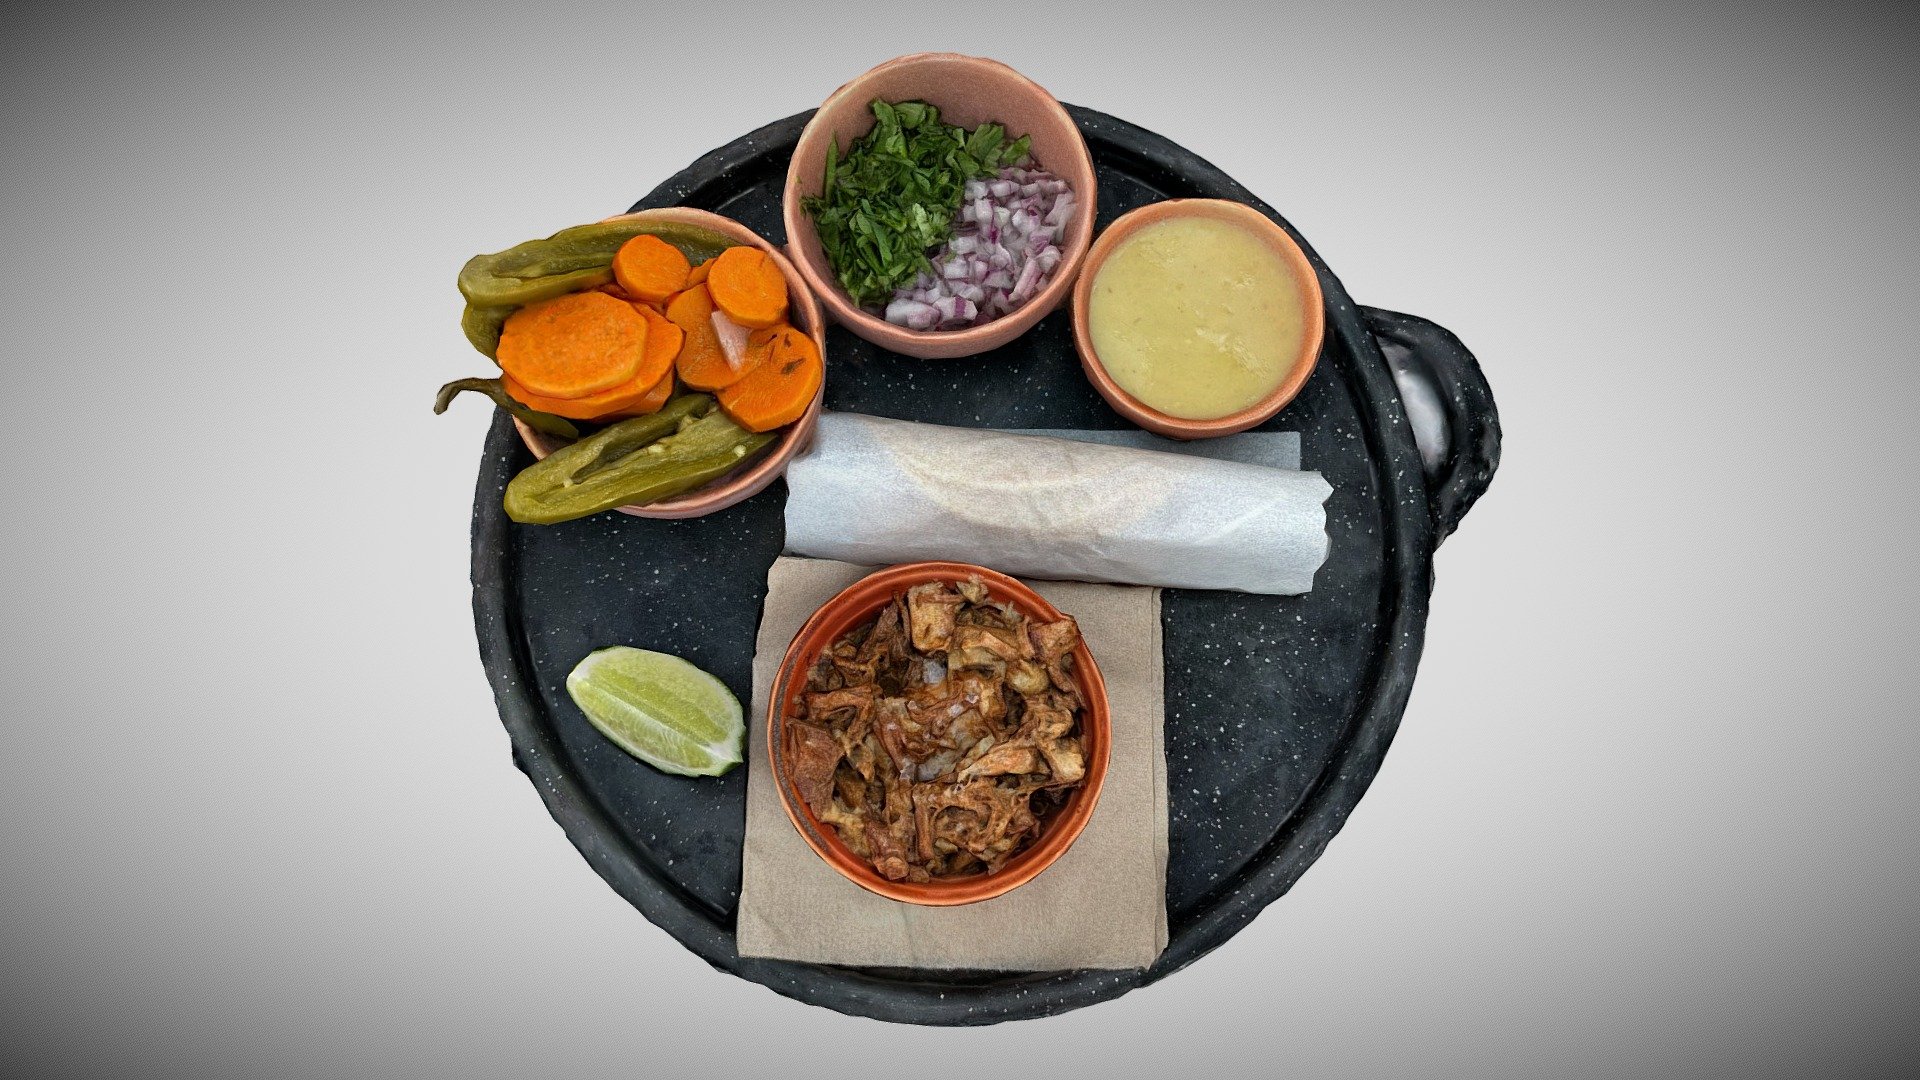 Braised pork | pickled vegetables | cilantro | onion | tomatillo &amp; habanero salsa | handmade tortillas served at Copita in Sausalito, Ca - Copita 24 Hour Carnitas - Buy Royalty Free 3D model by Augmented Reality Marketing Solutions LLC (@AugRealMarketing) 3d model